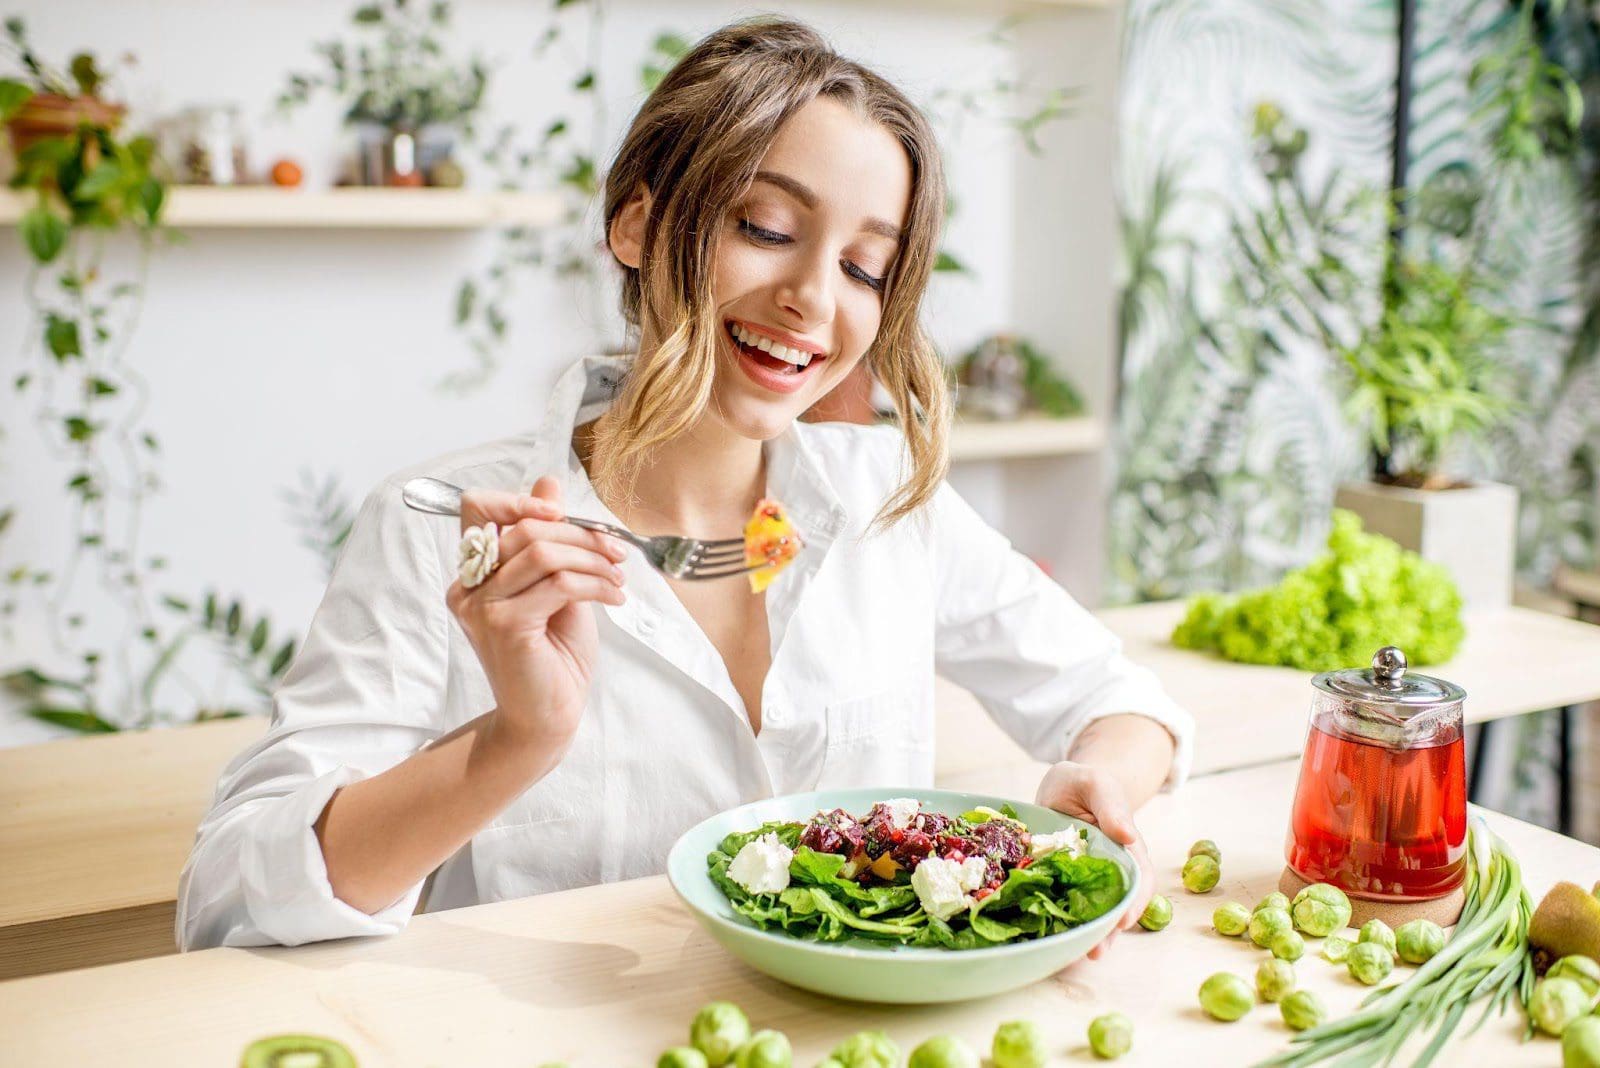 Young woman eating a salad at her kitchen table.